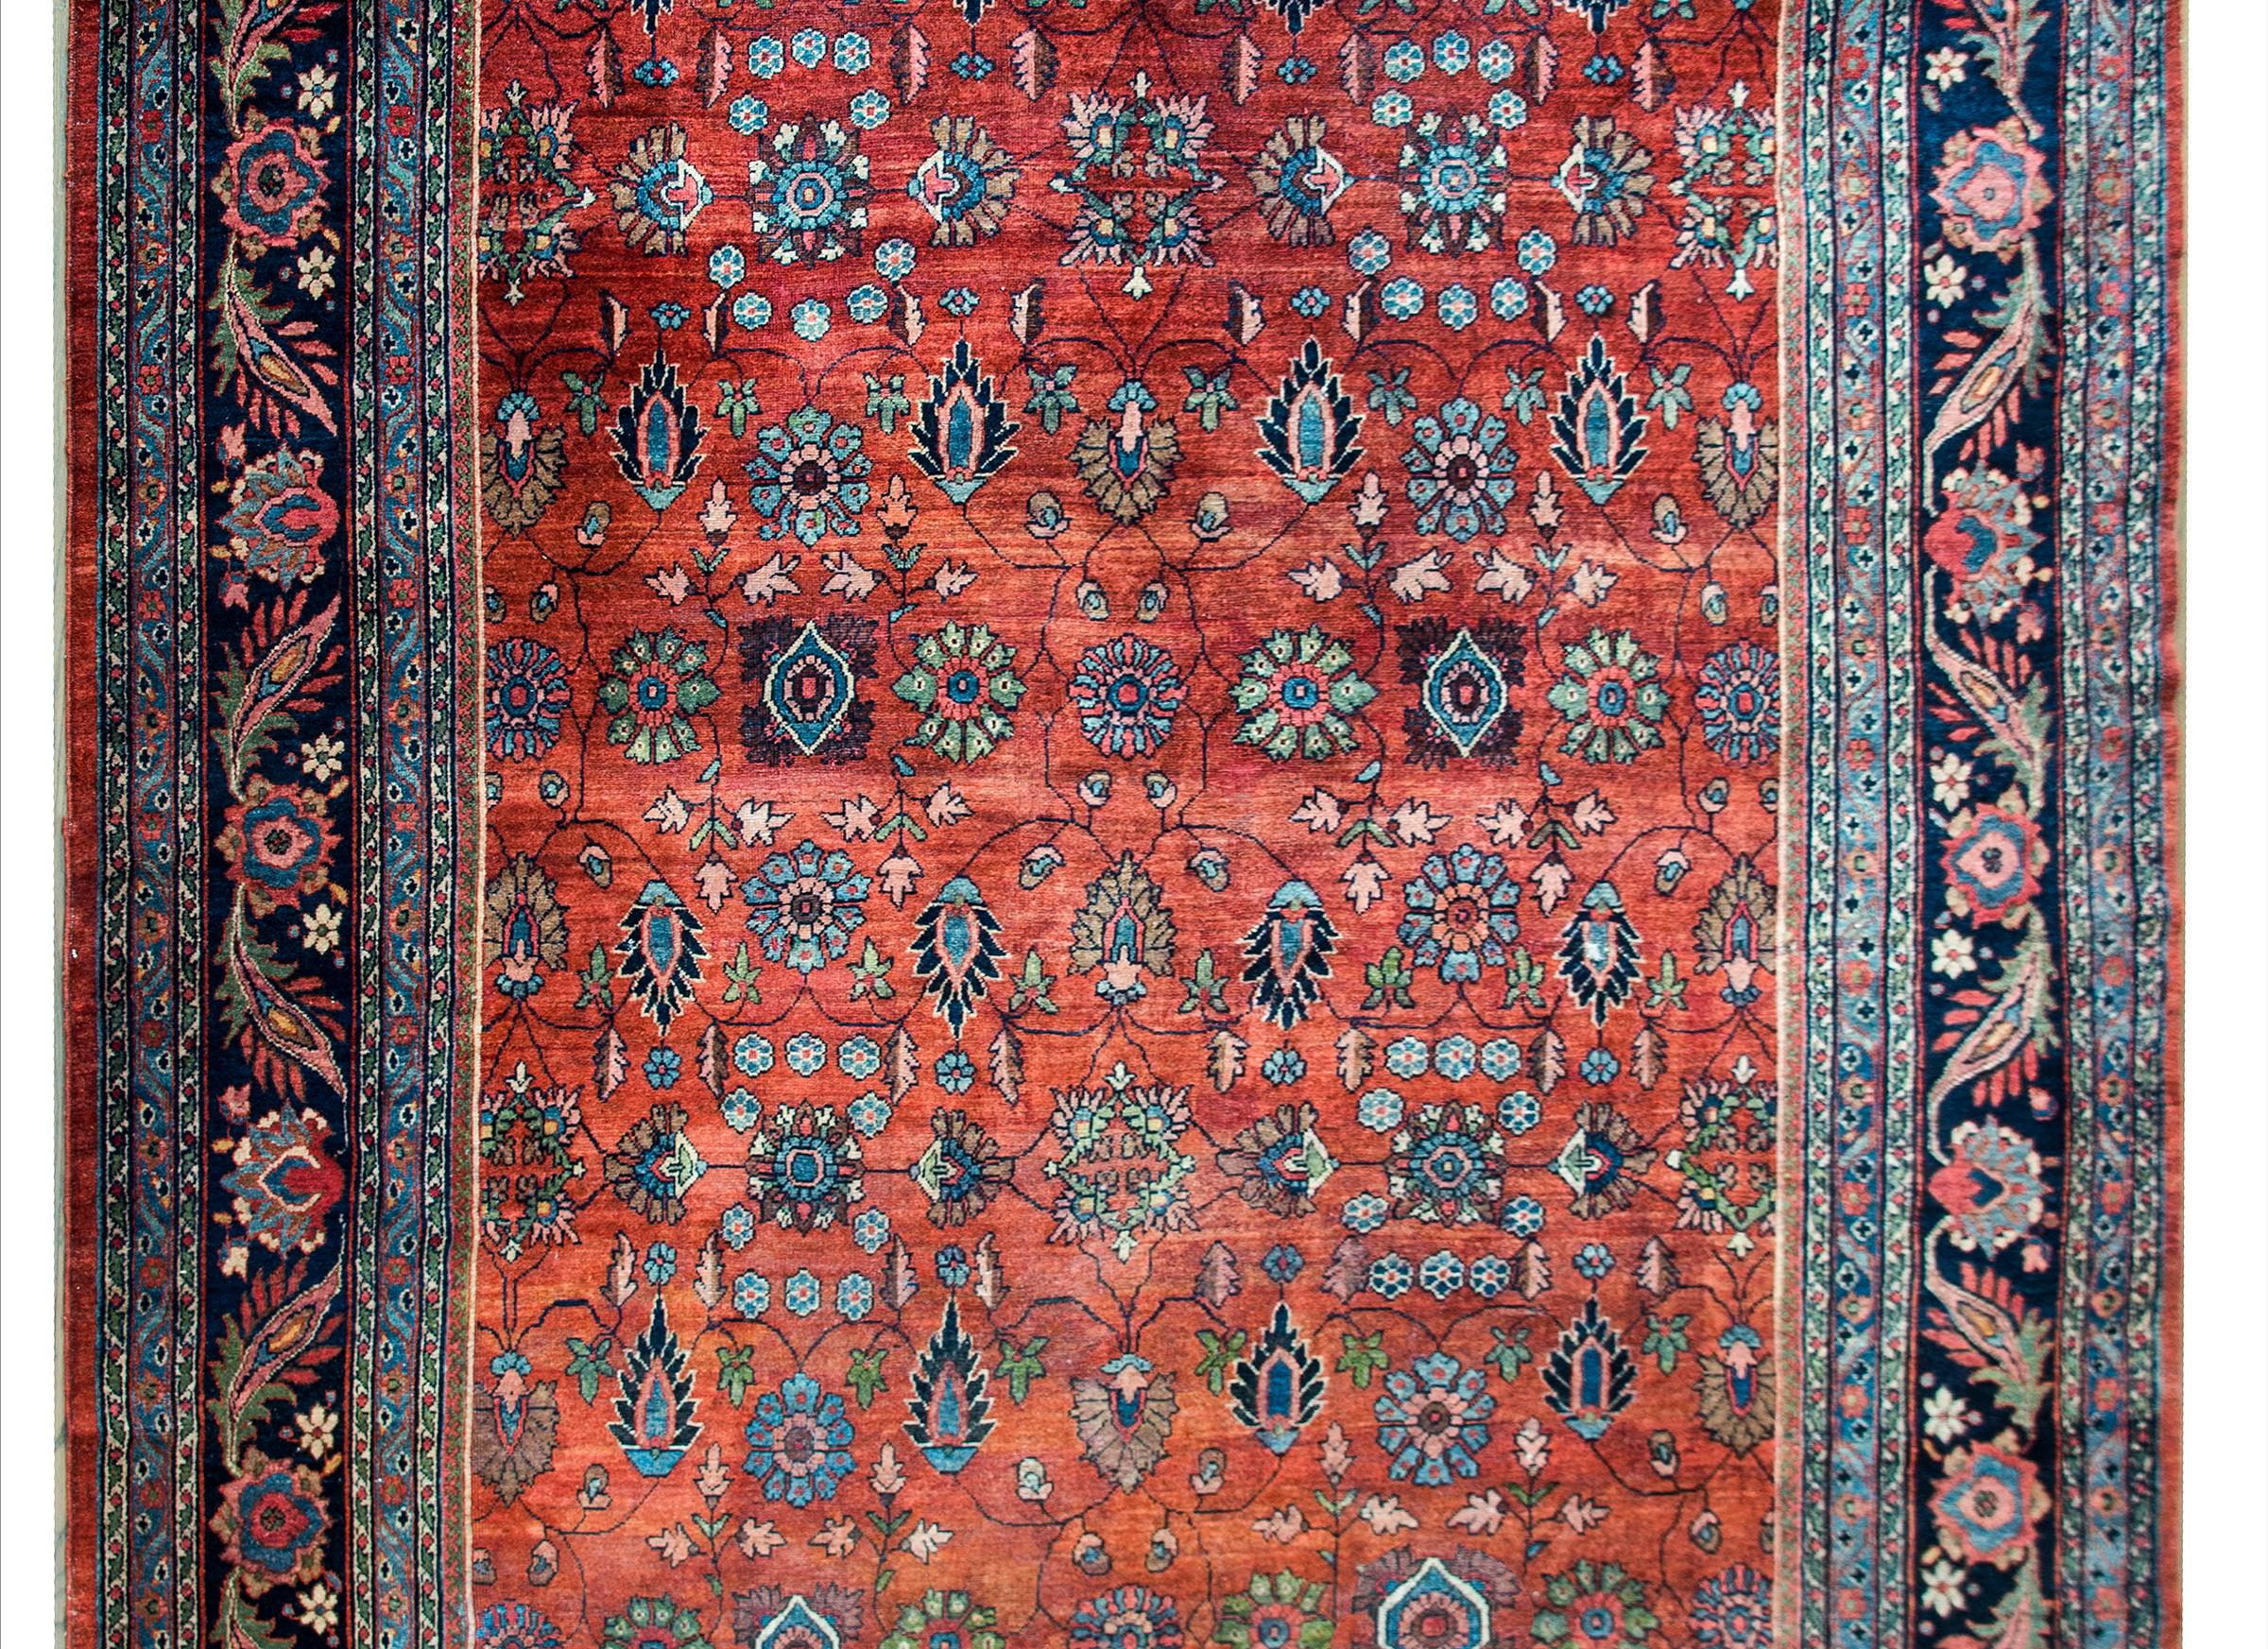 A beautiful early 20th century Persian Sarouk Mahal rug with an all-over floral pattern with myriad flowers and thin scrolling vines woven in indigo, brown, cream, and pink, and set against a crimson background. The border is complex with a wide